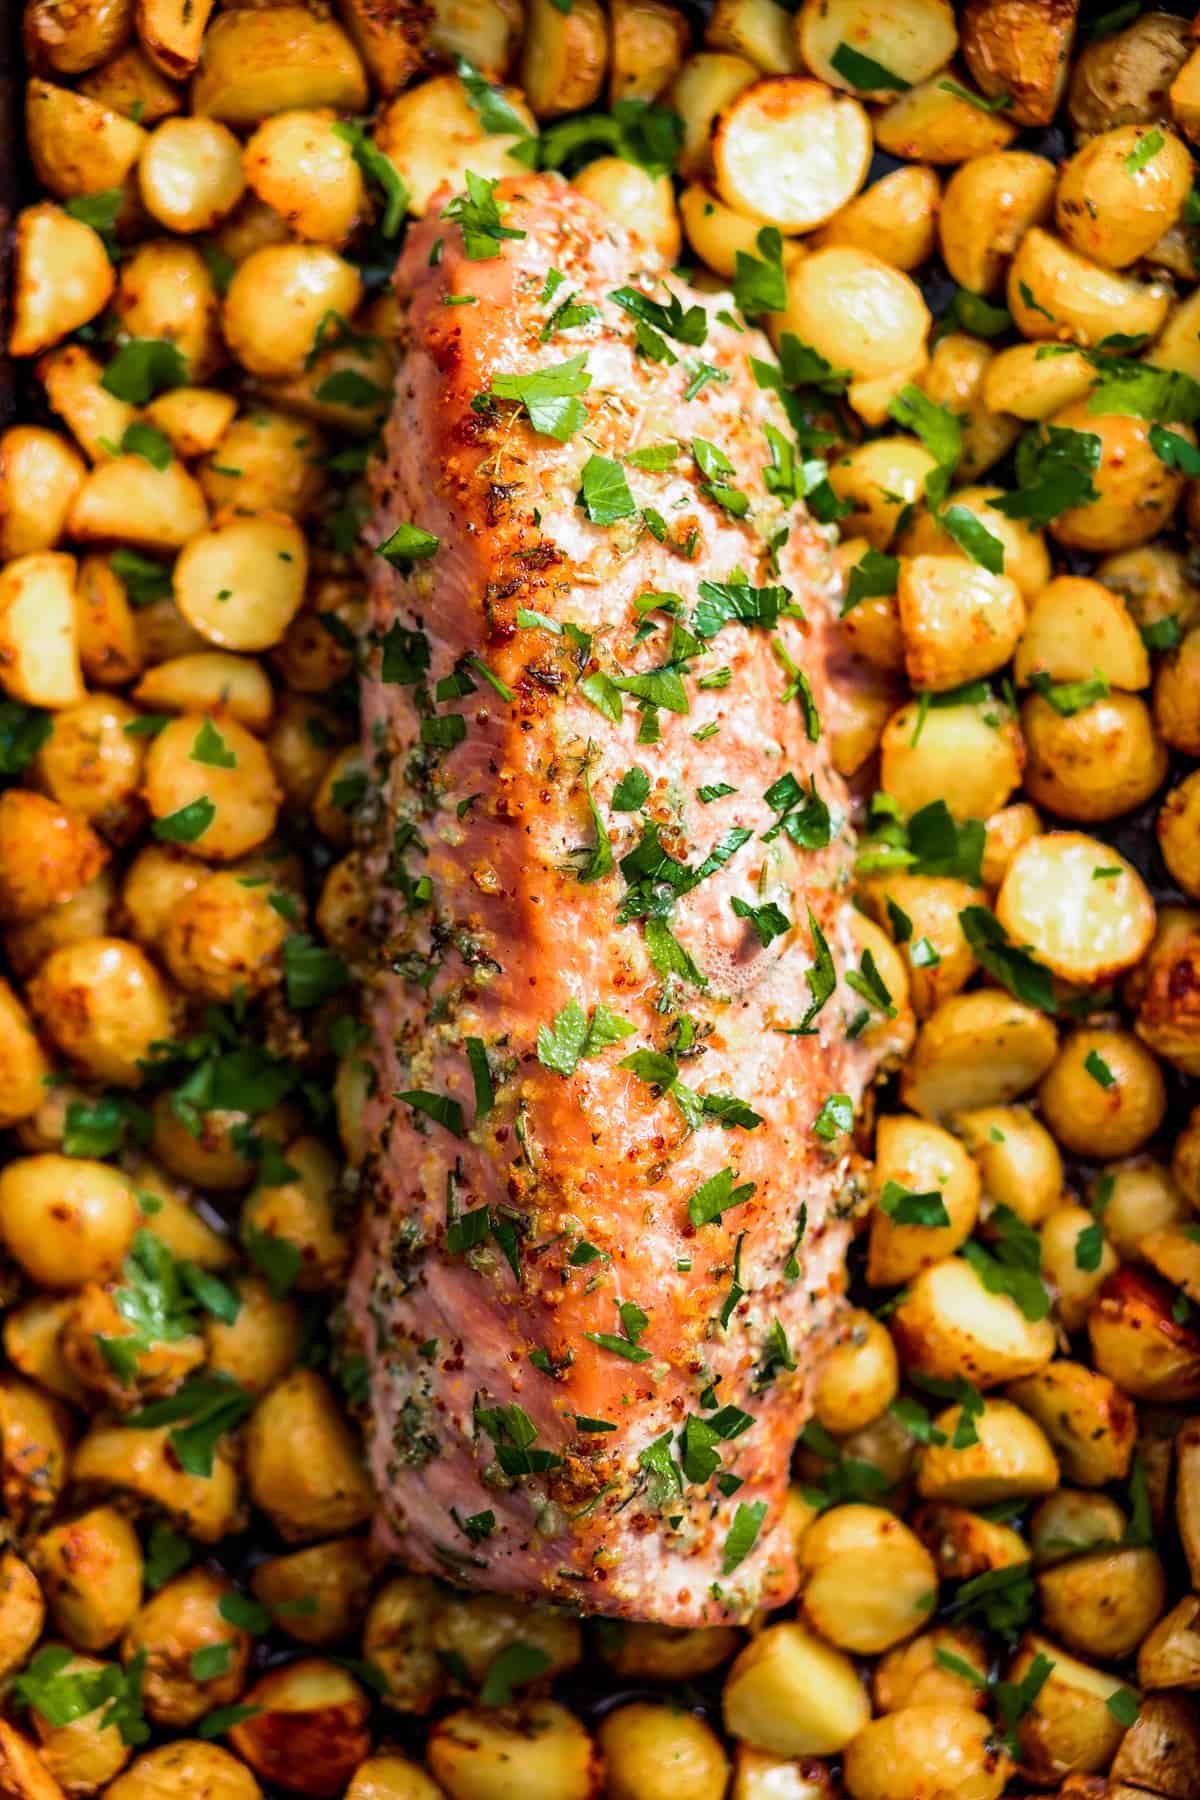 Baked honey garlic pork tenderloin with roasted potatoes, garnished with parsley.